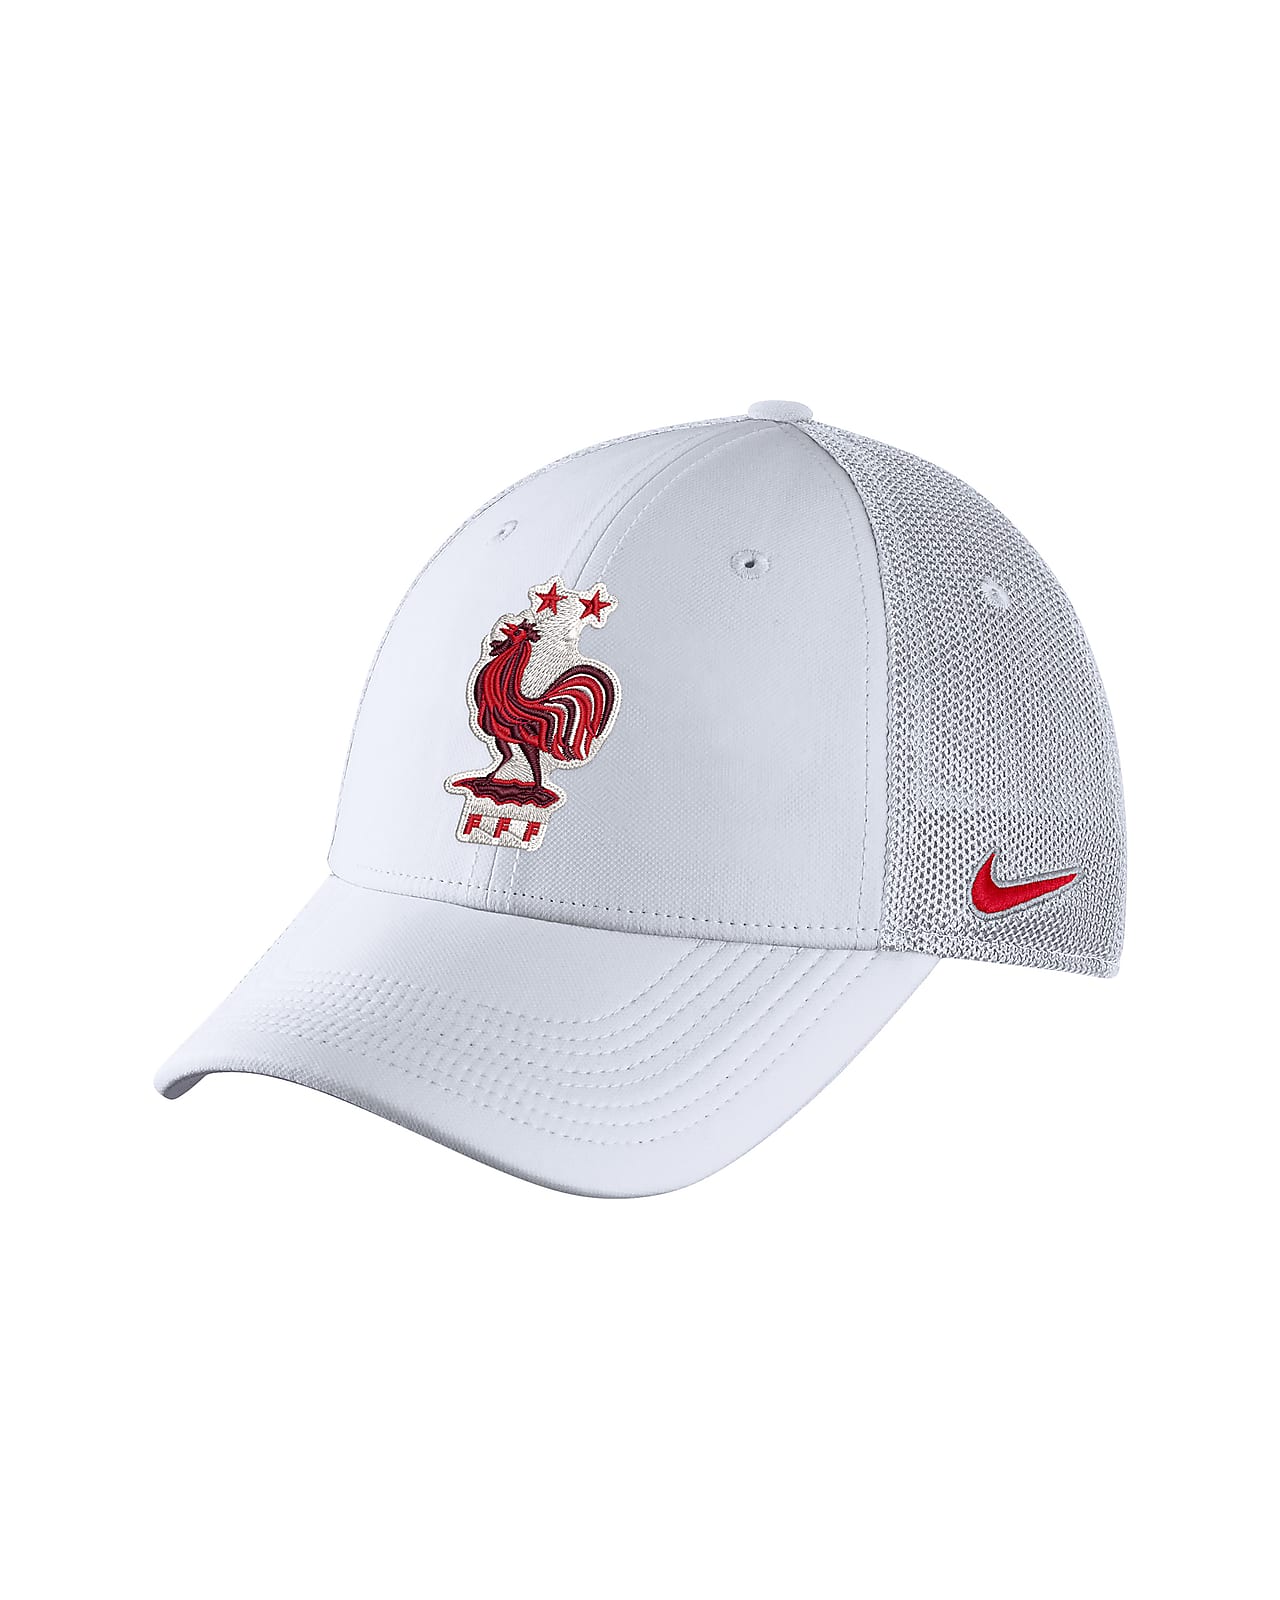 FFF Legacy91 Men's Nike AeroBill Fitted Hat